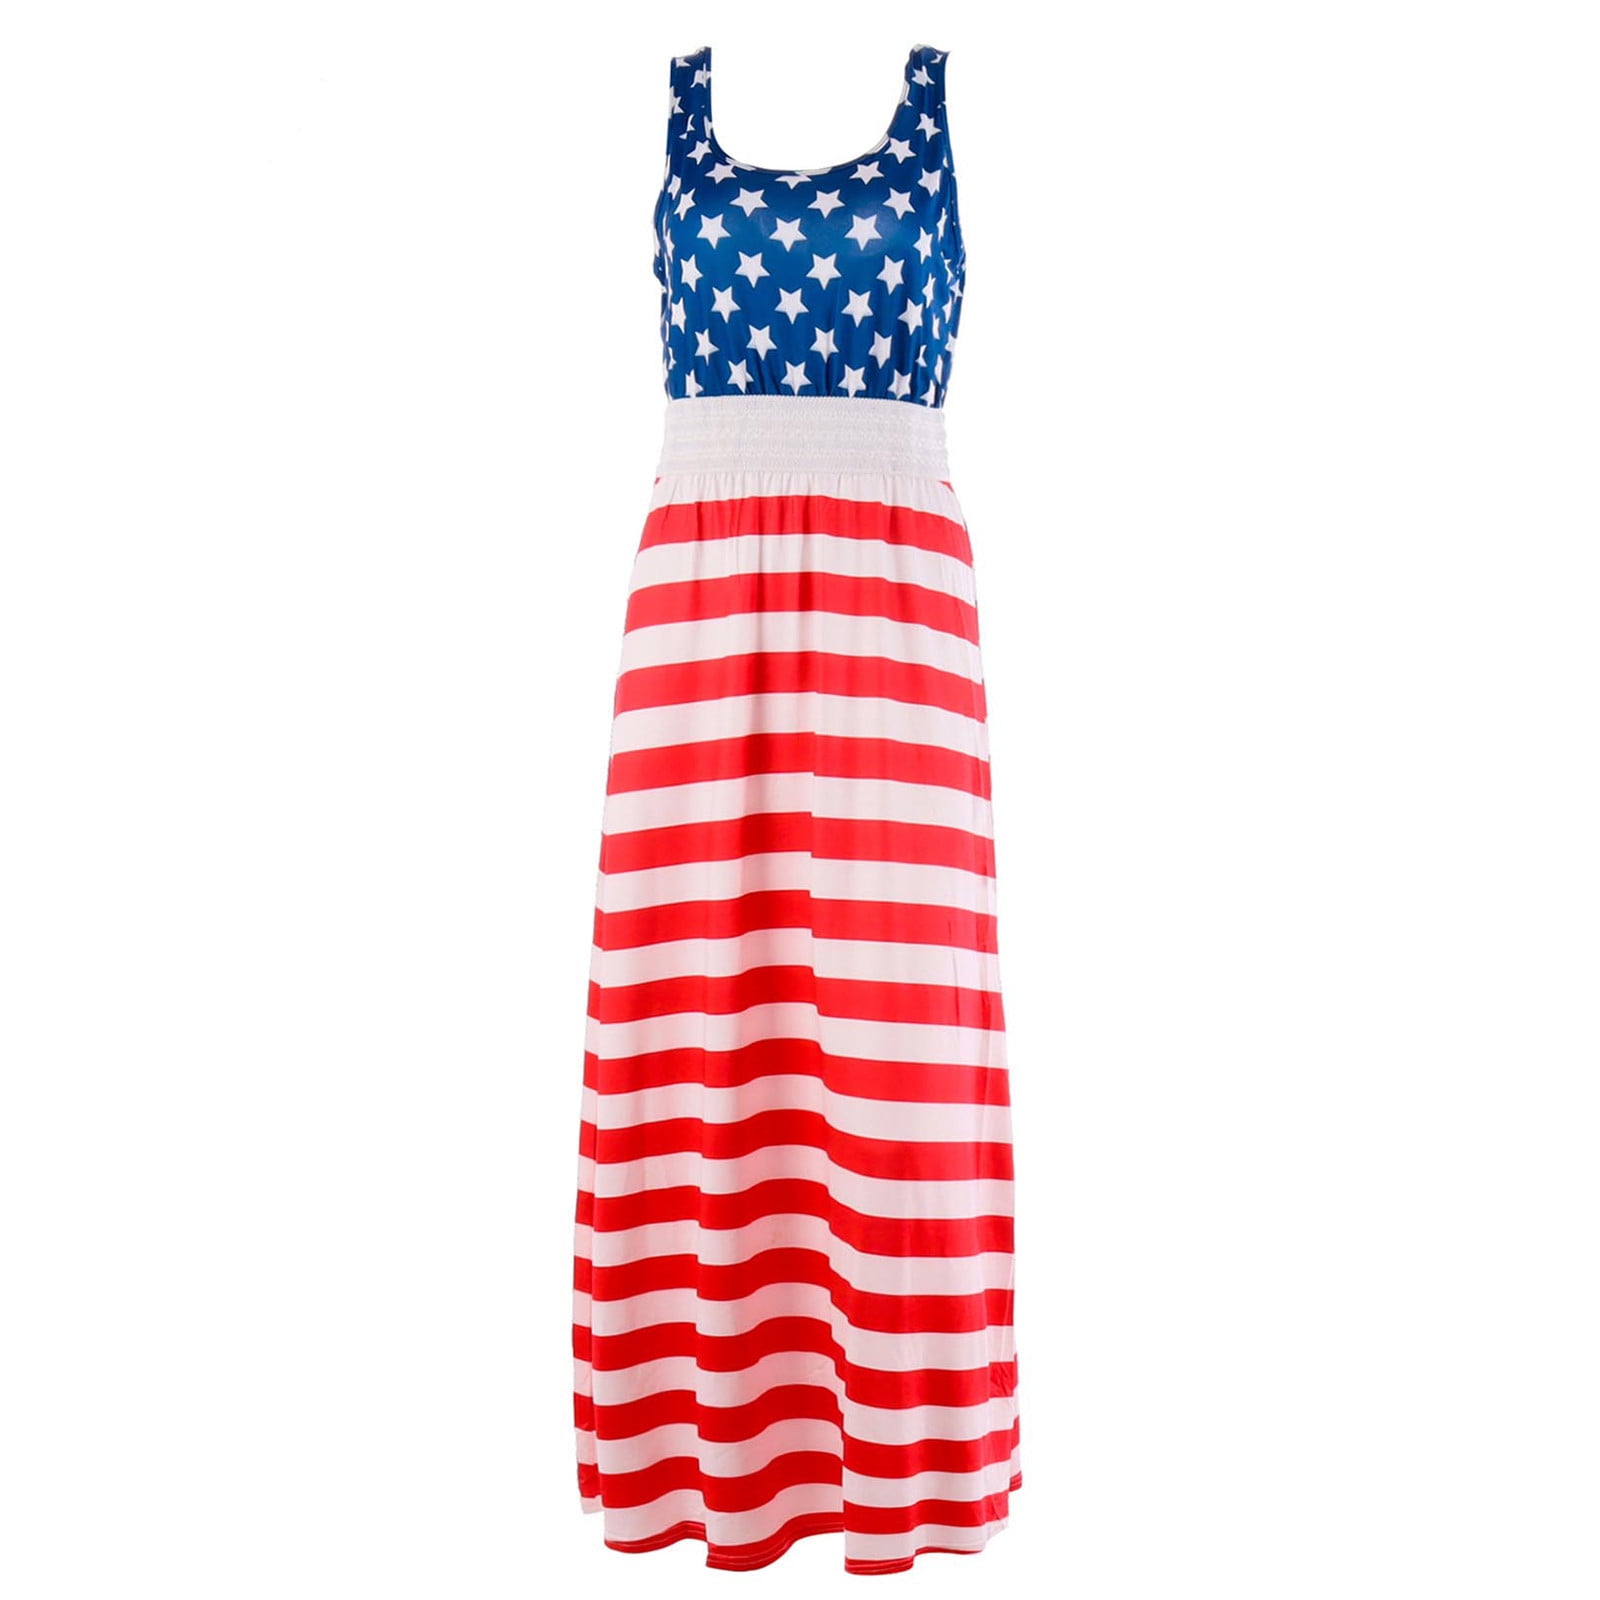 AnuirheiH Parent-child Wear Spring And Summer Clothes Independence Day Mother And Daughter Casual Striped Dress 4$ off 2nd - Walmart.com